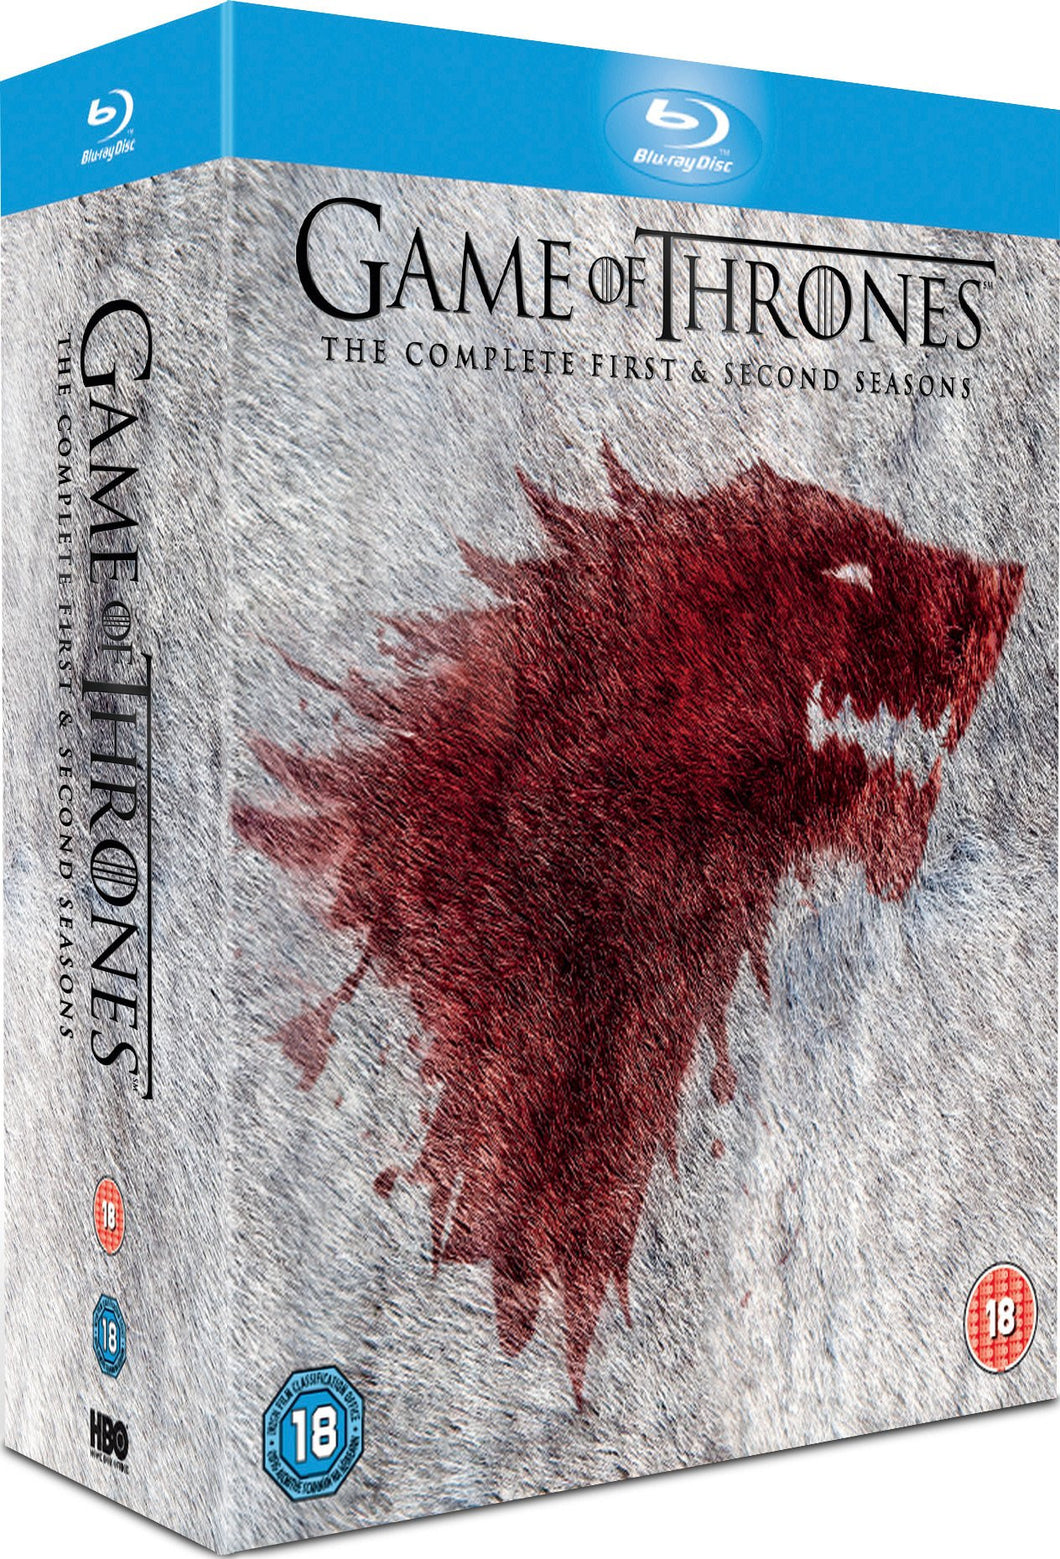 Game Of Thrones - The Complete First & Second Seasons - Blu-Ray